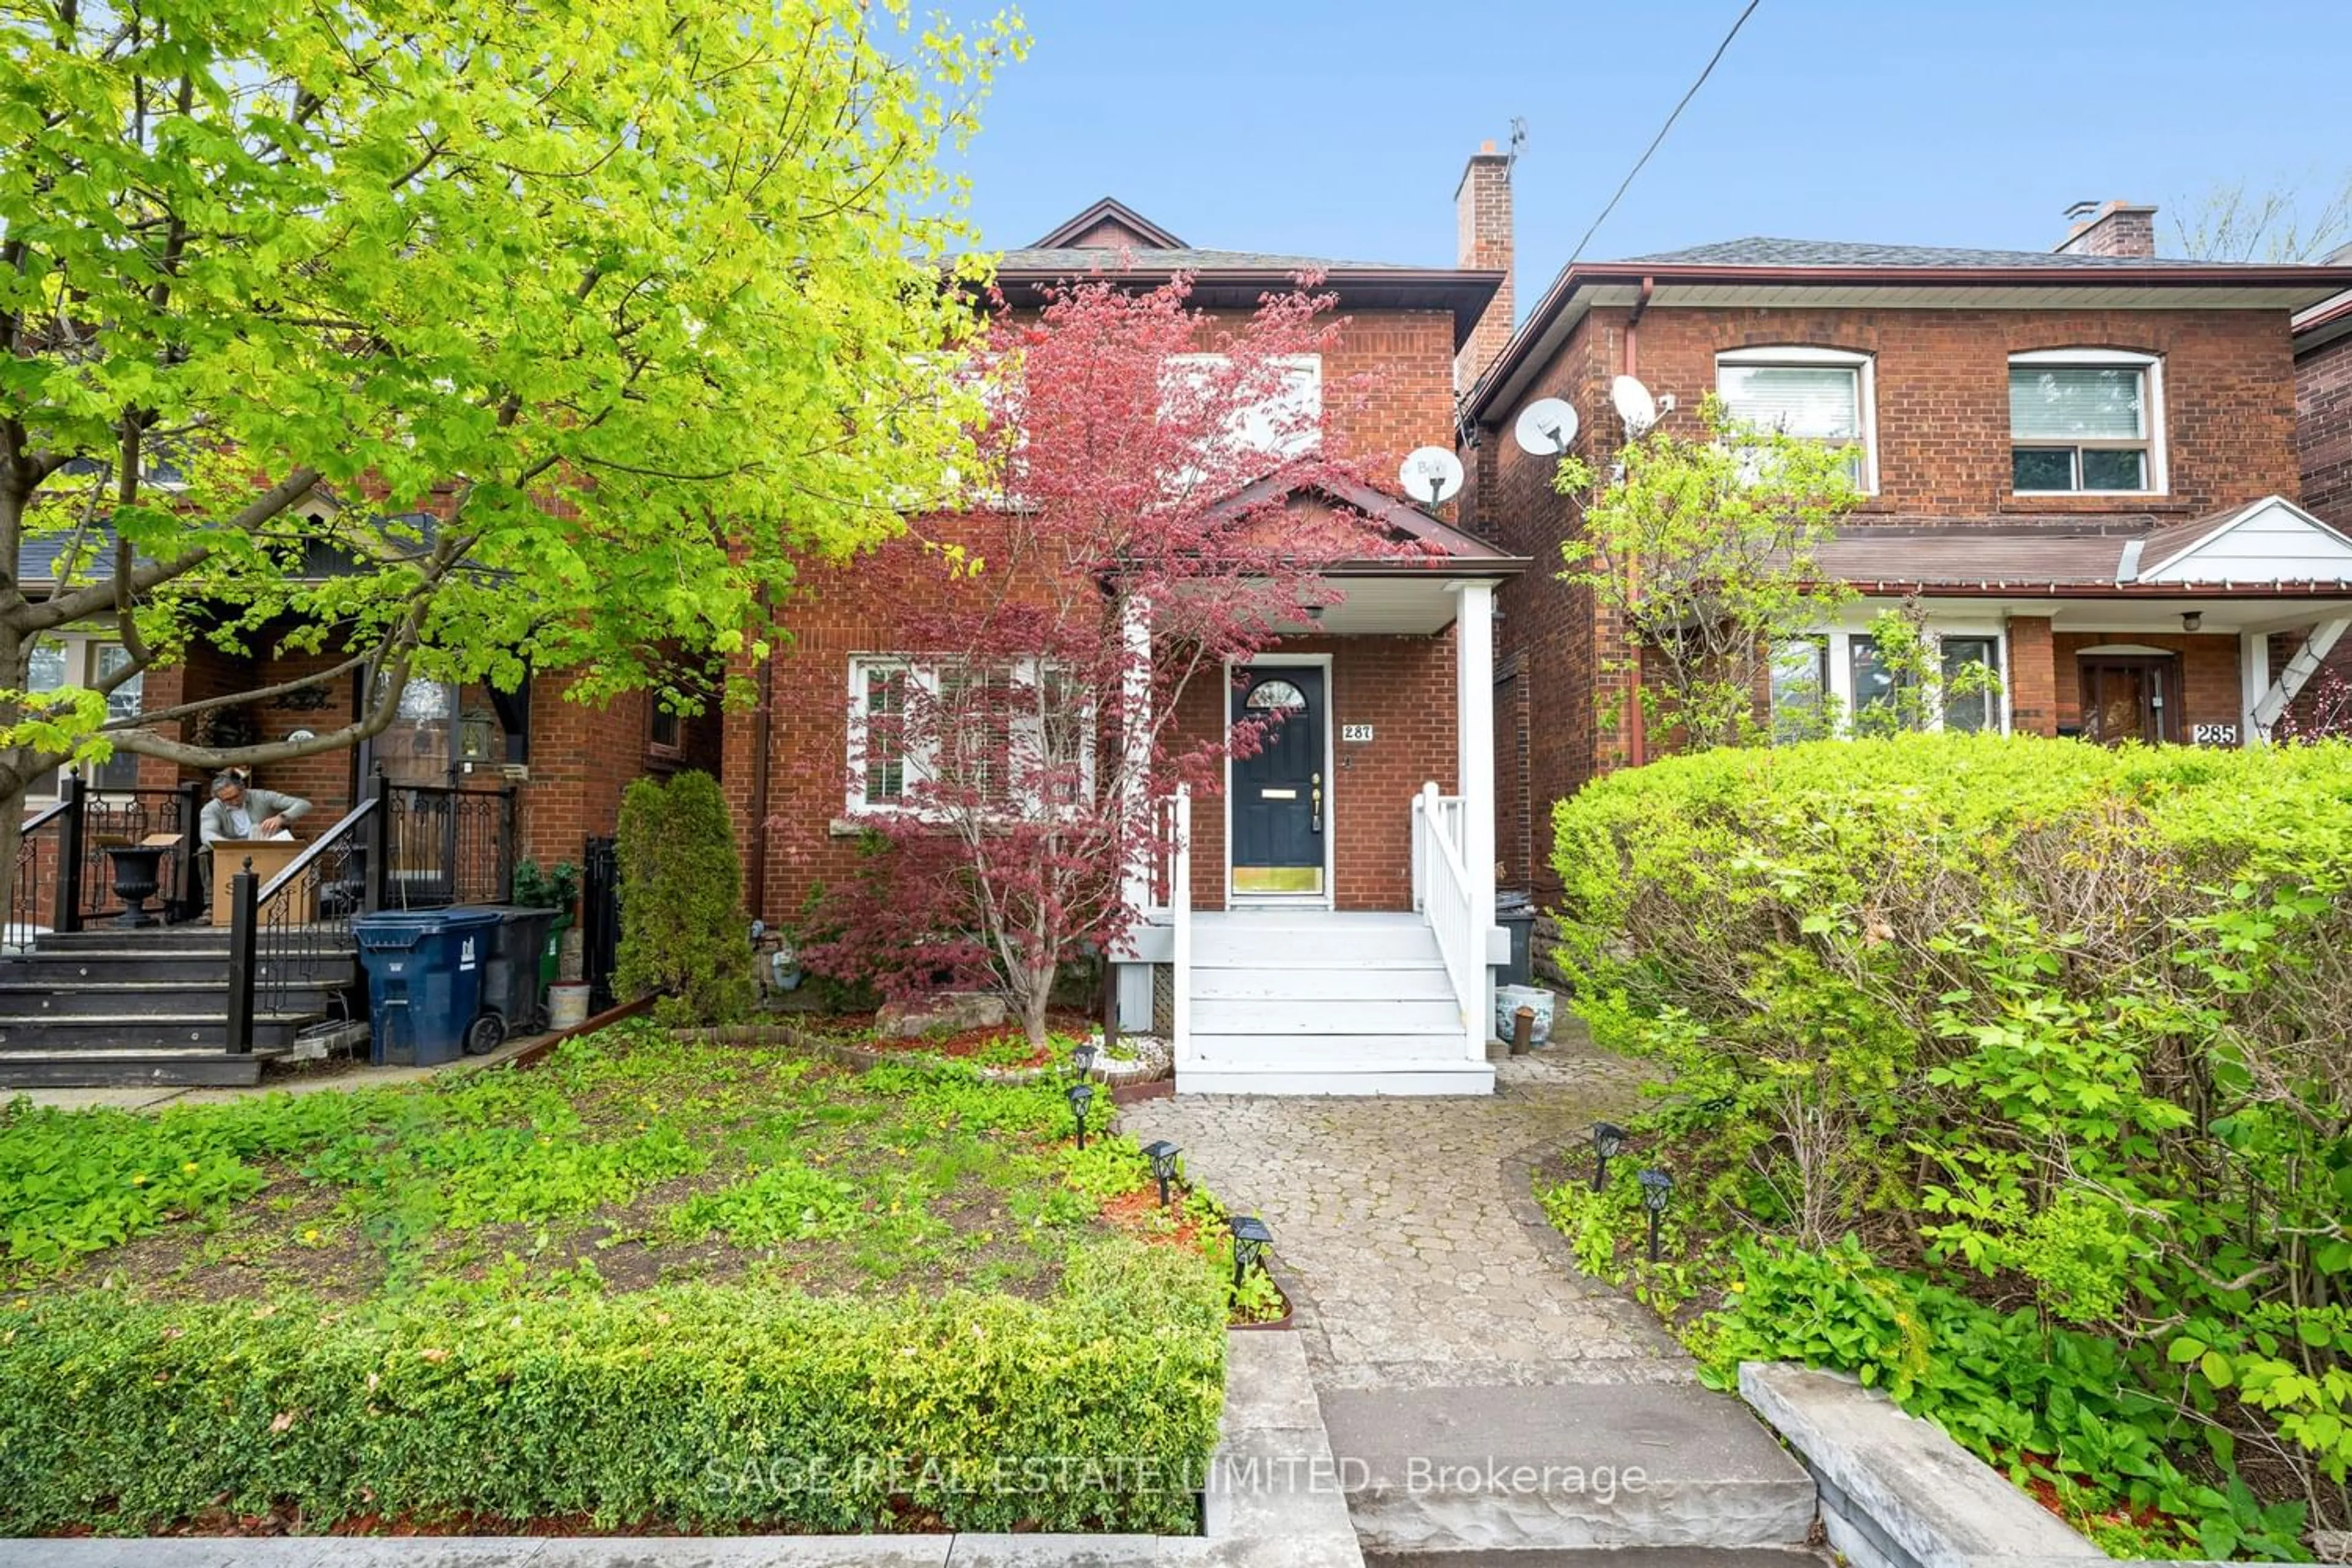 Home with brick exterior material for 287 Vaughan Rd, Toronto Ontario M6C 2N3